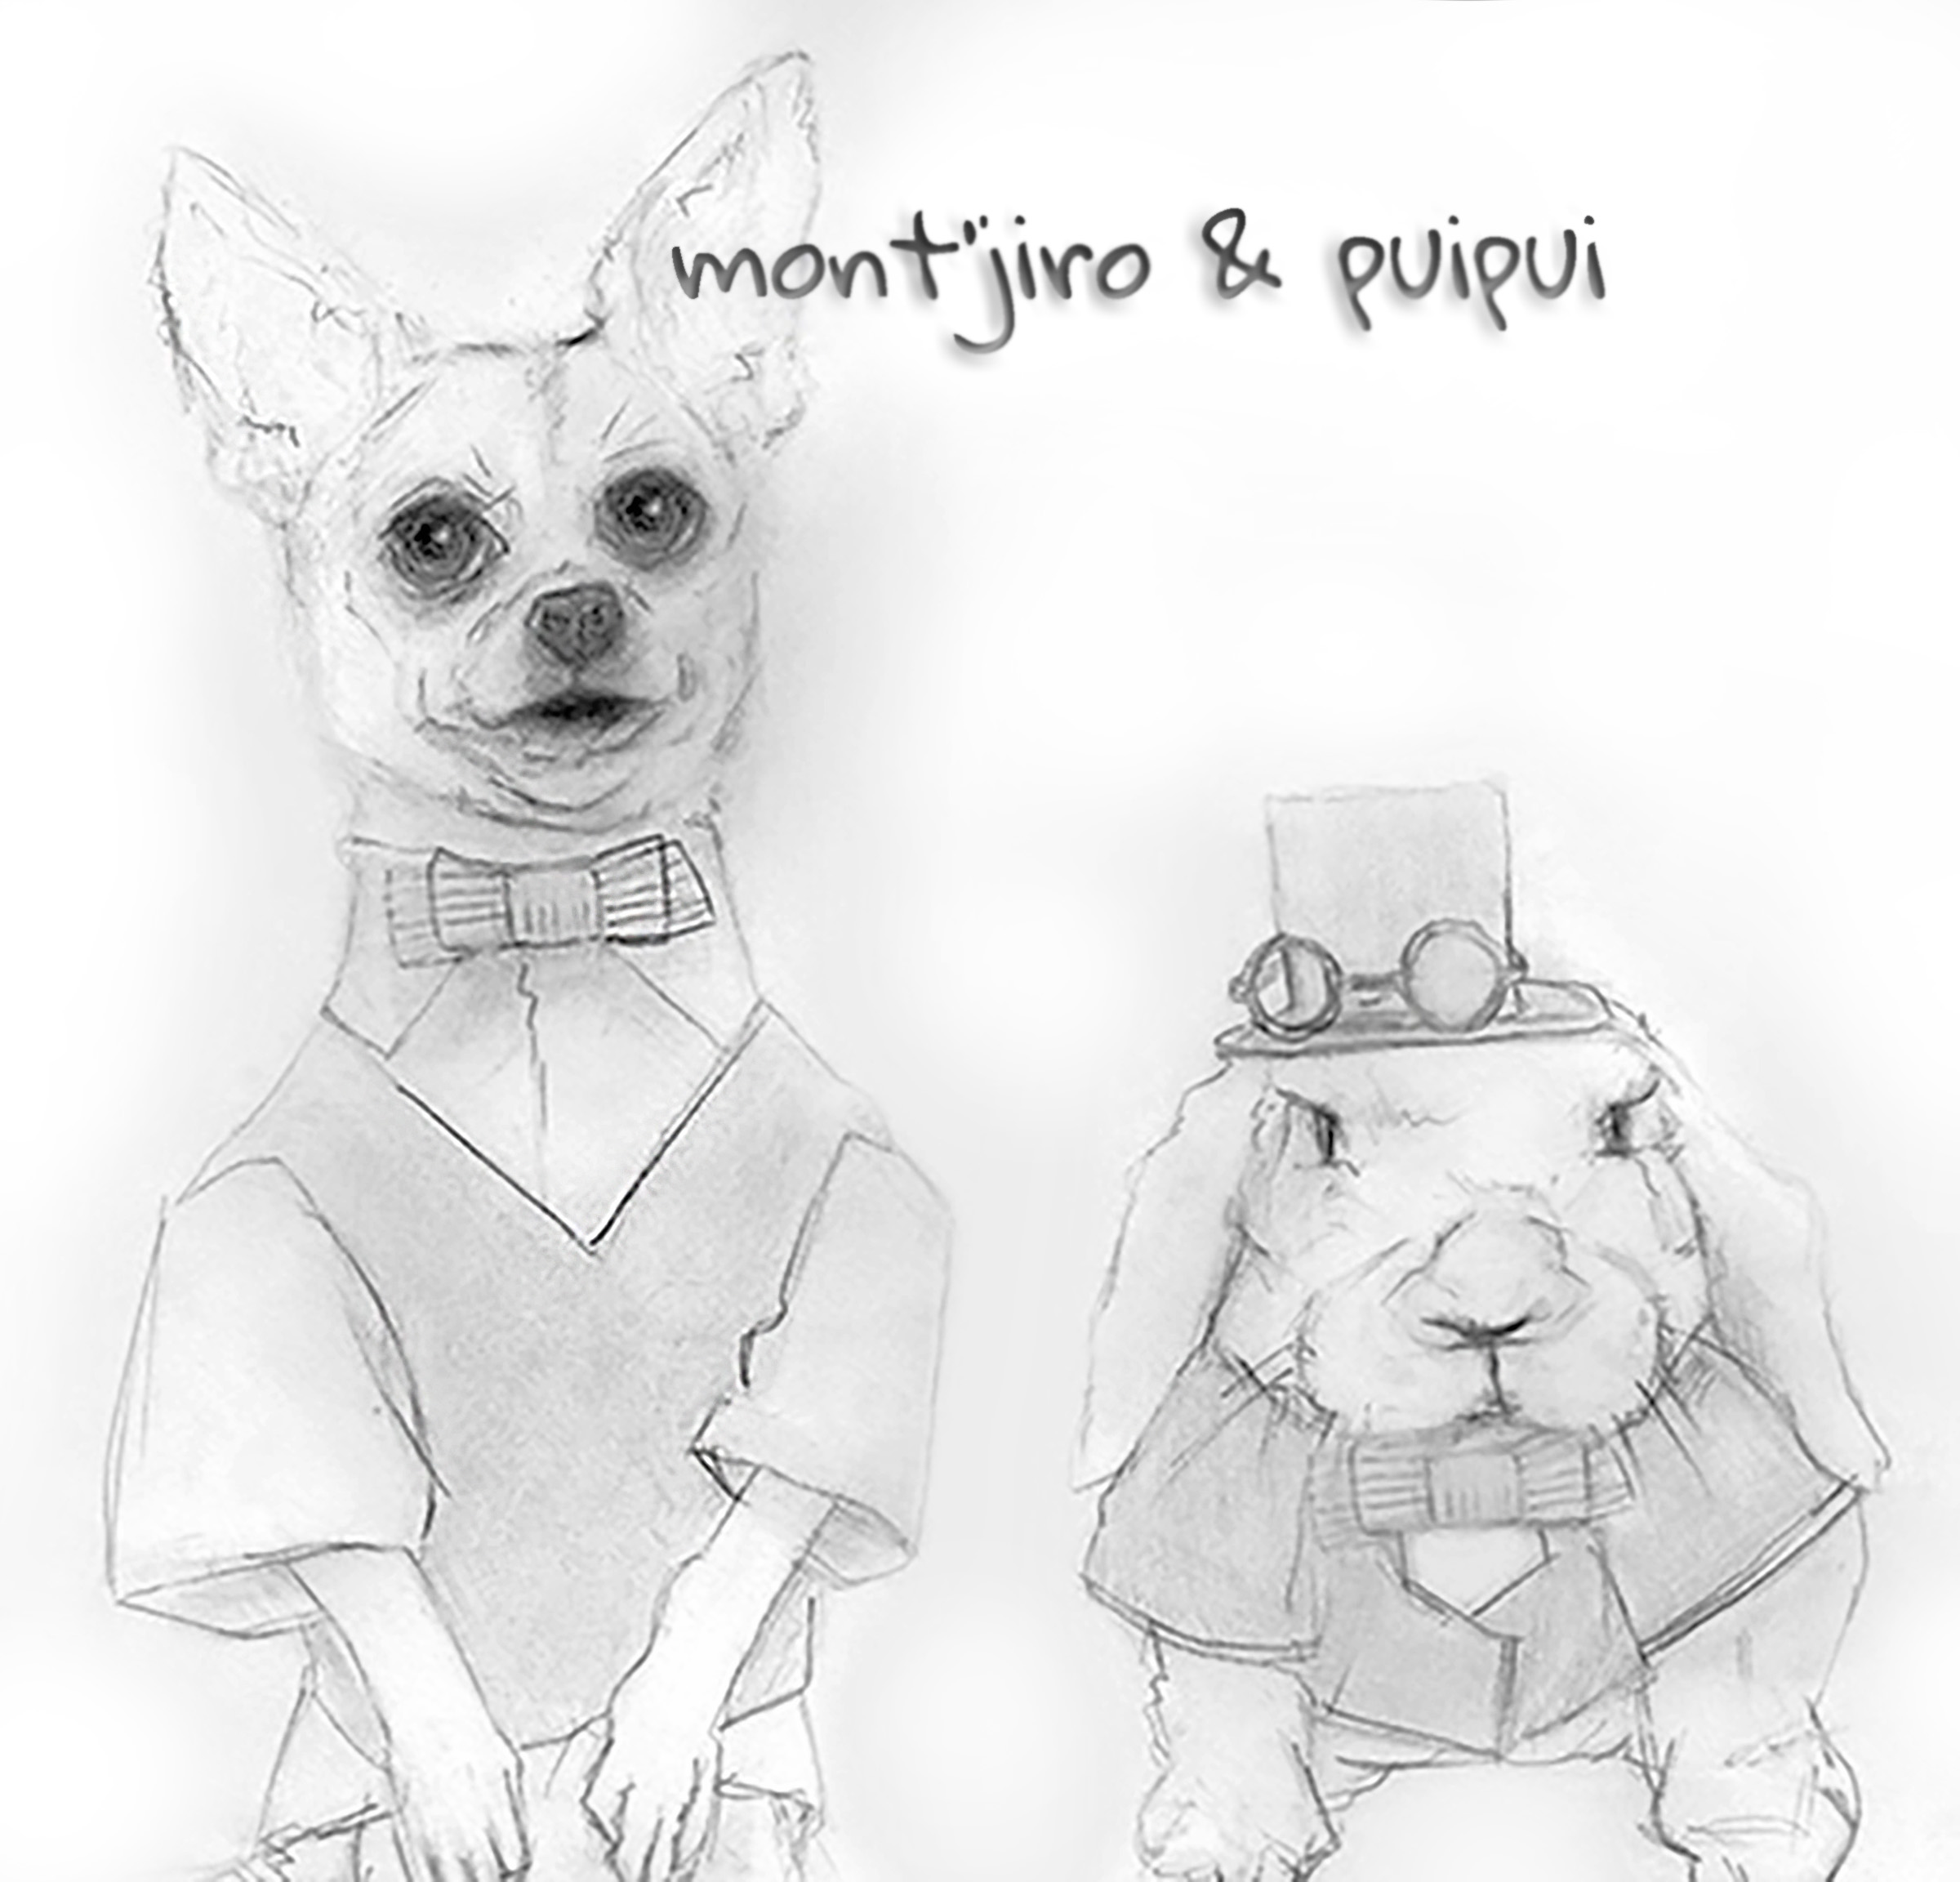 mont'jiro the chihuahua & puipui the rabbit - cute circus creature couture follow feature